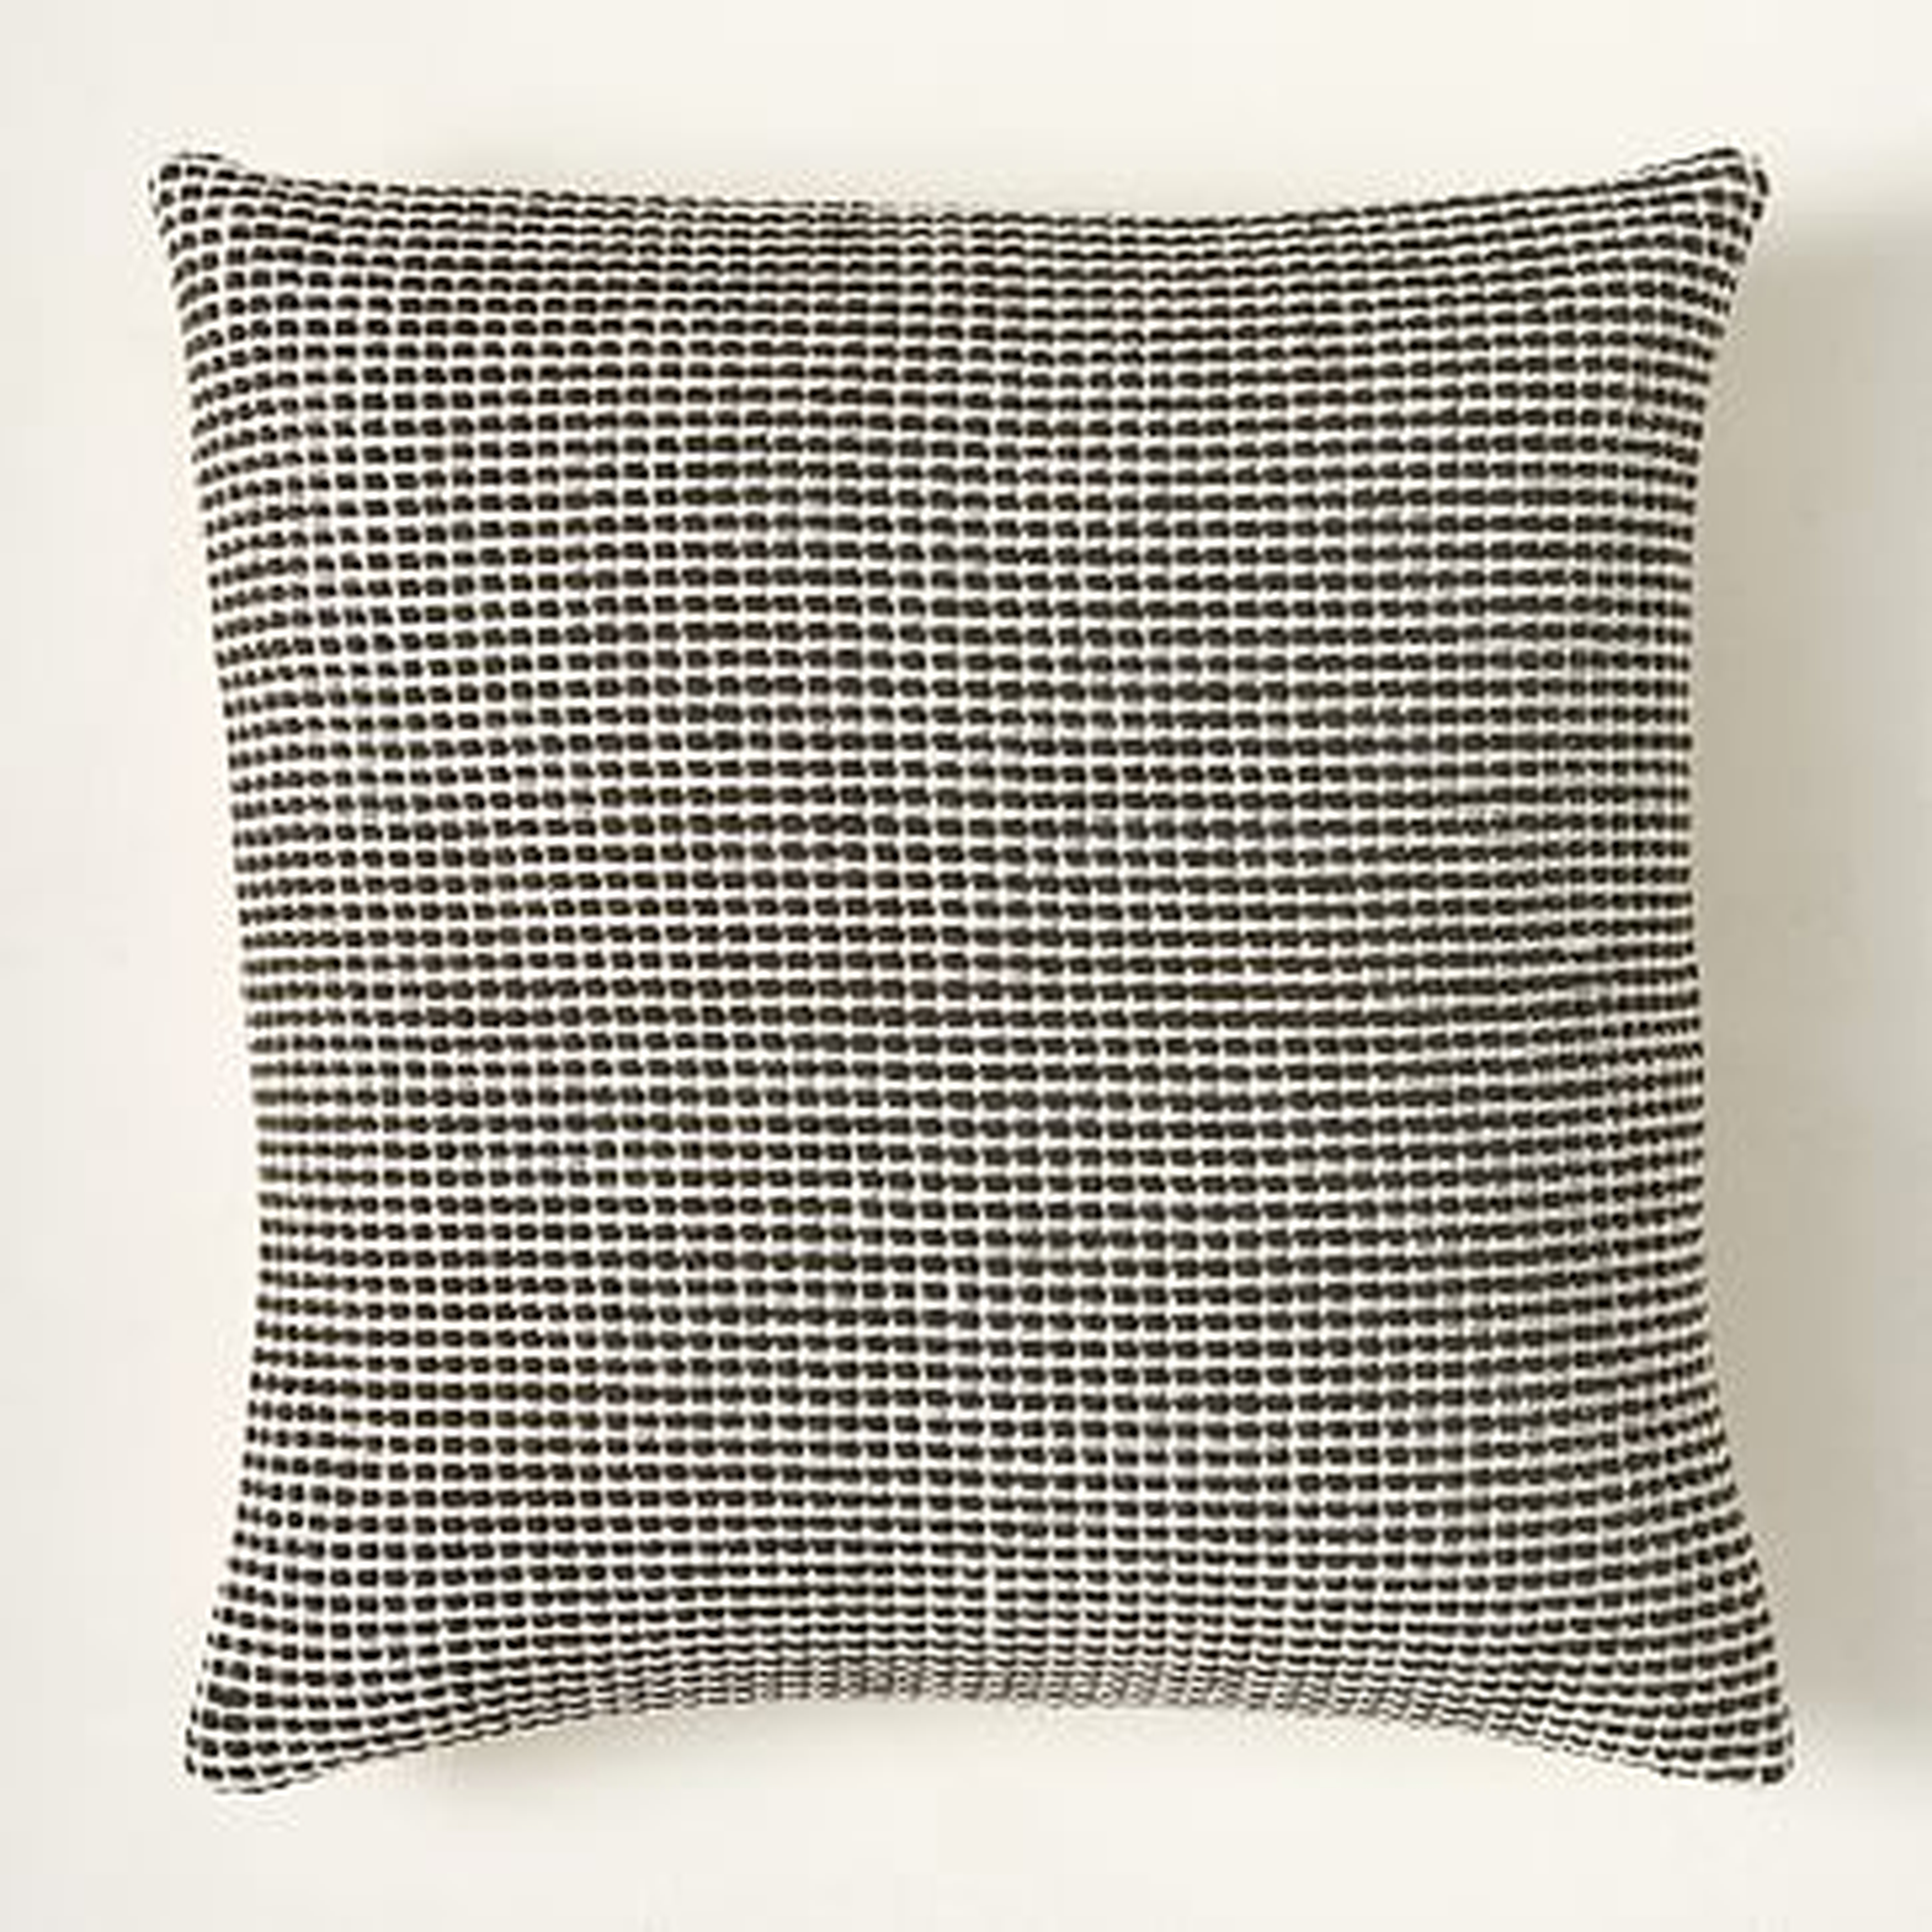 Textured Dimple Dot Pillow Cover, 20"x20", Dark Olive - West Elm